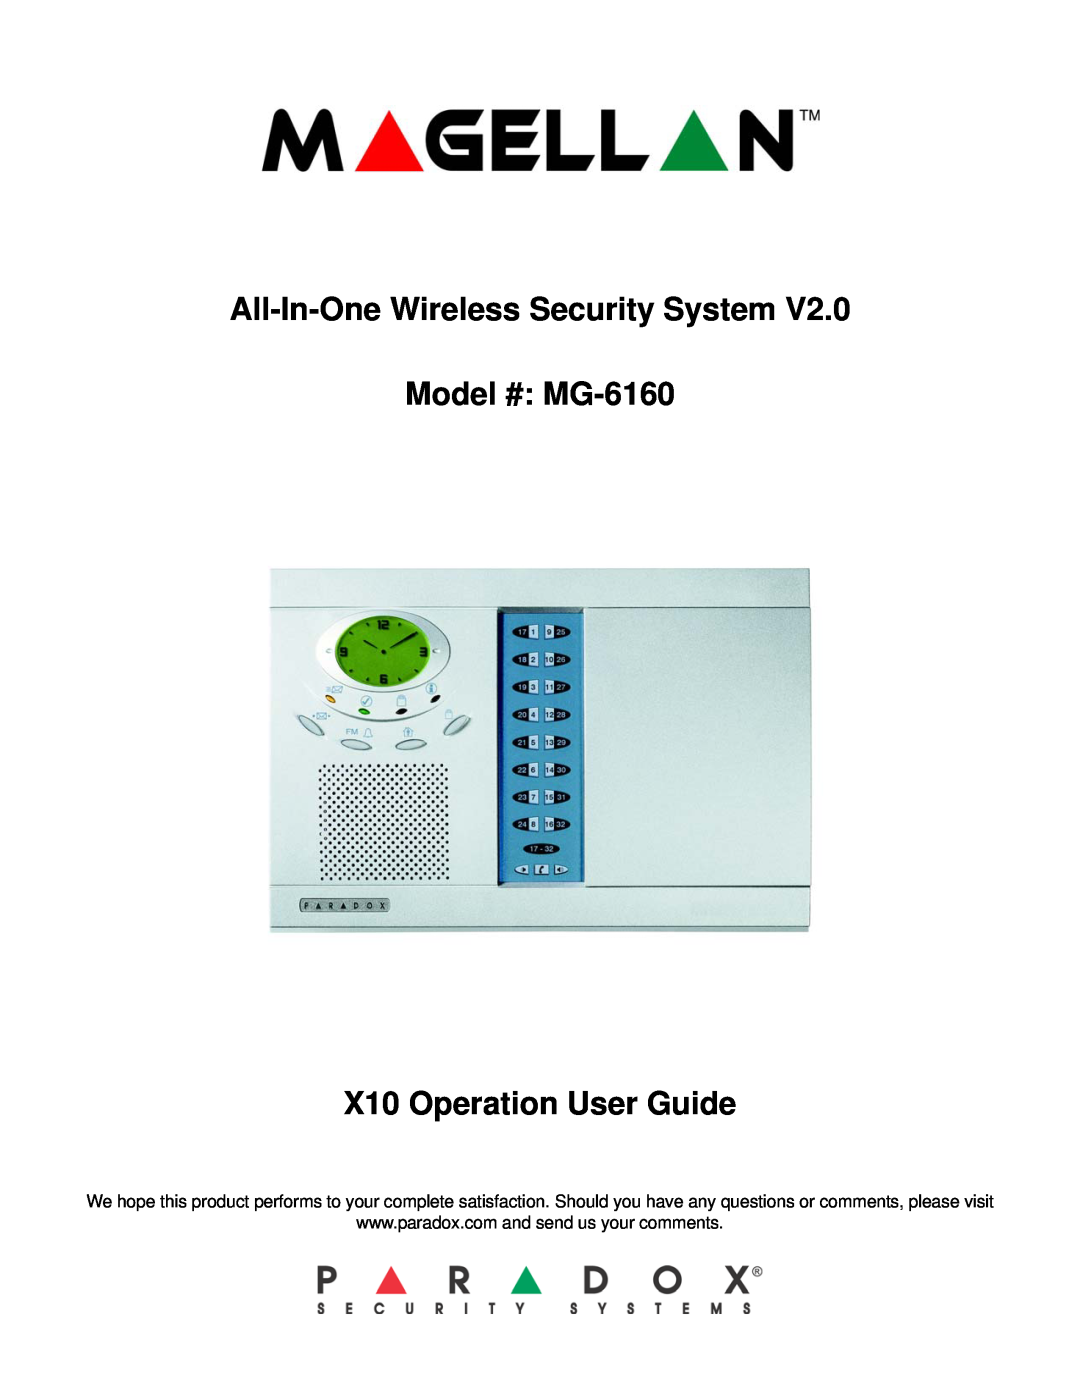 Magellan manual All-In-OneWireless Security System, Model # MG-6160 X10 Operation User Guide 